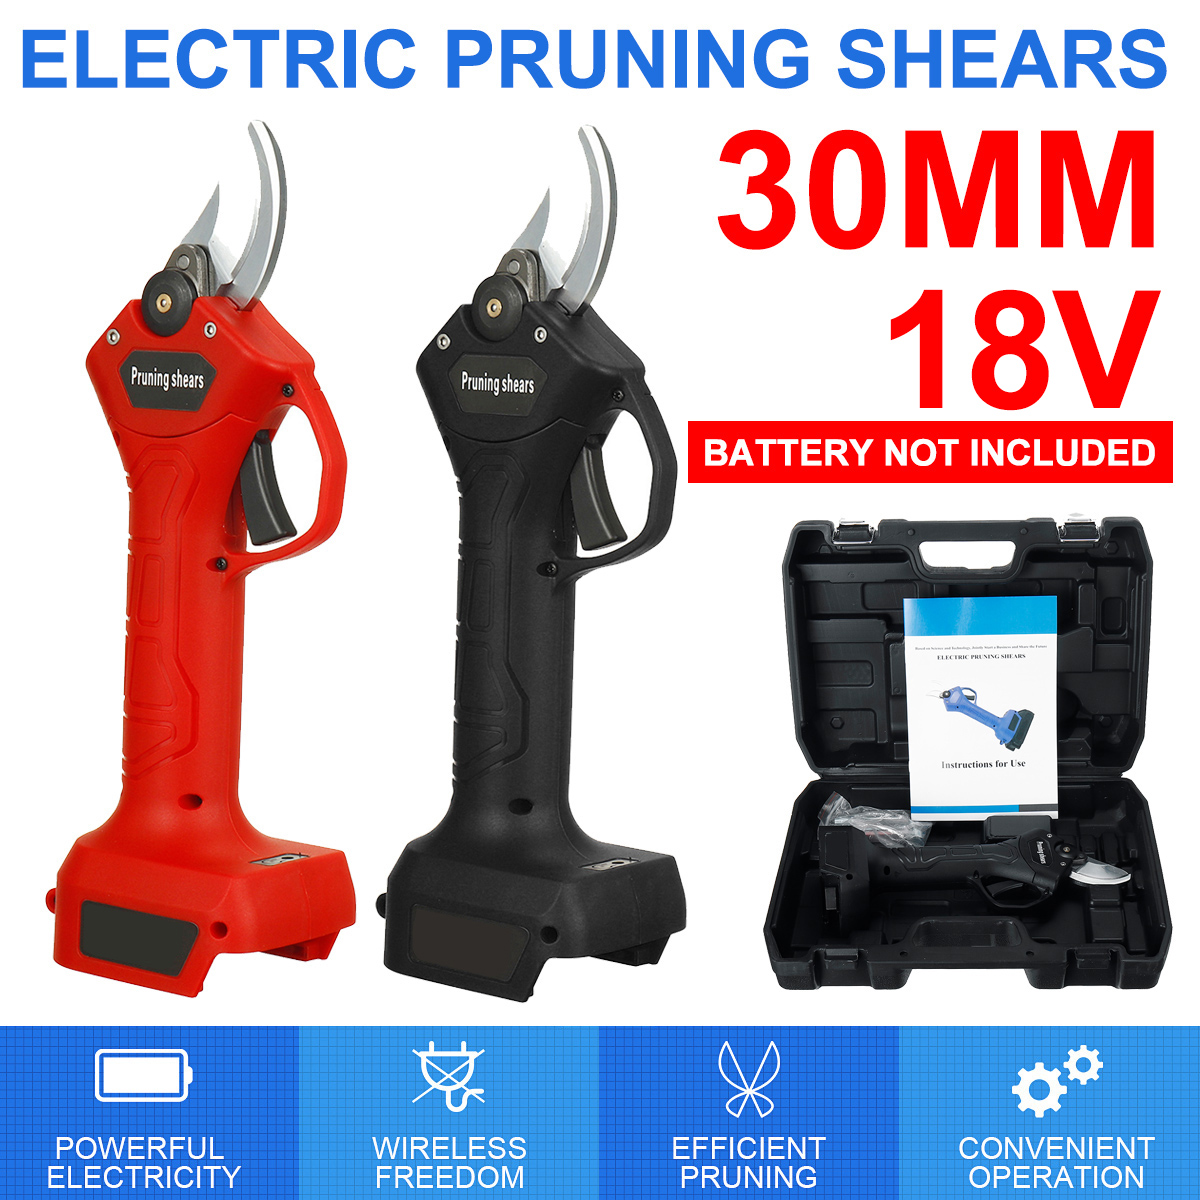 30mm-Cordless-Electric-Pruning-Shears-Liion-Battery-Leaves-Trimmer-Garden-Power-Tool-Fit-Makita-1885465-4